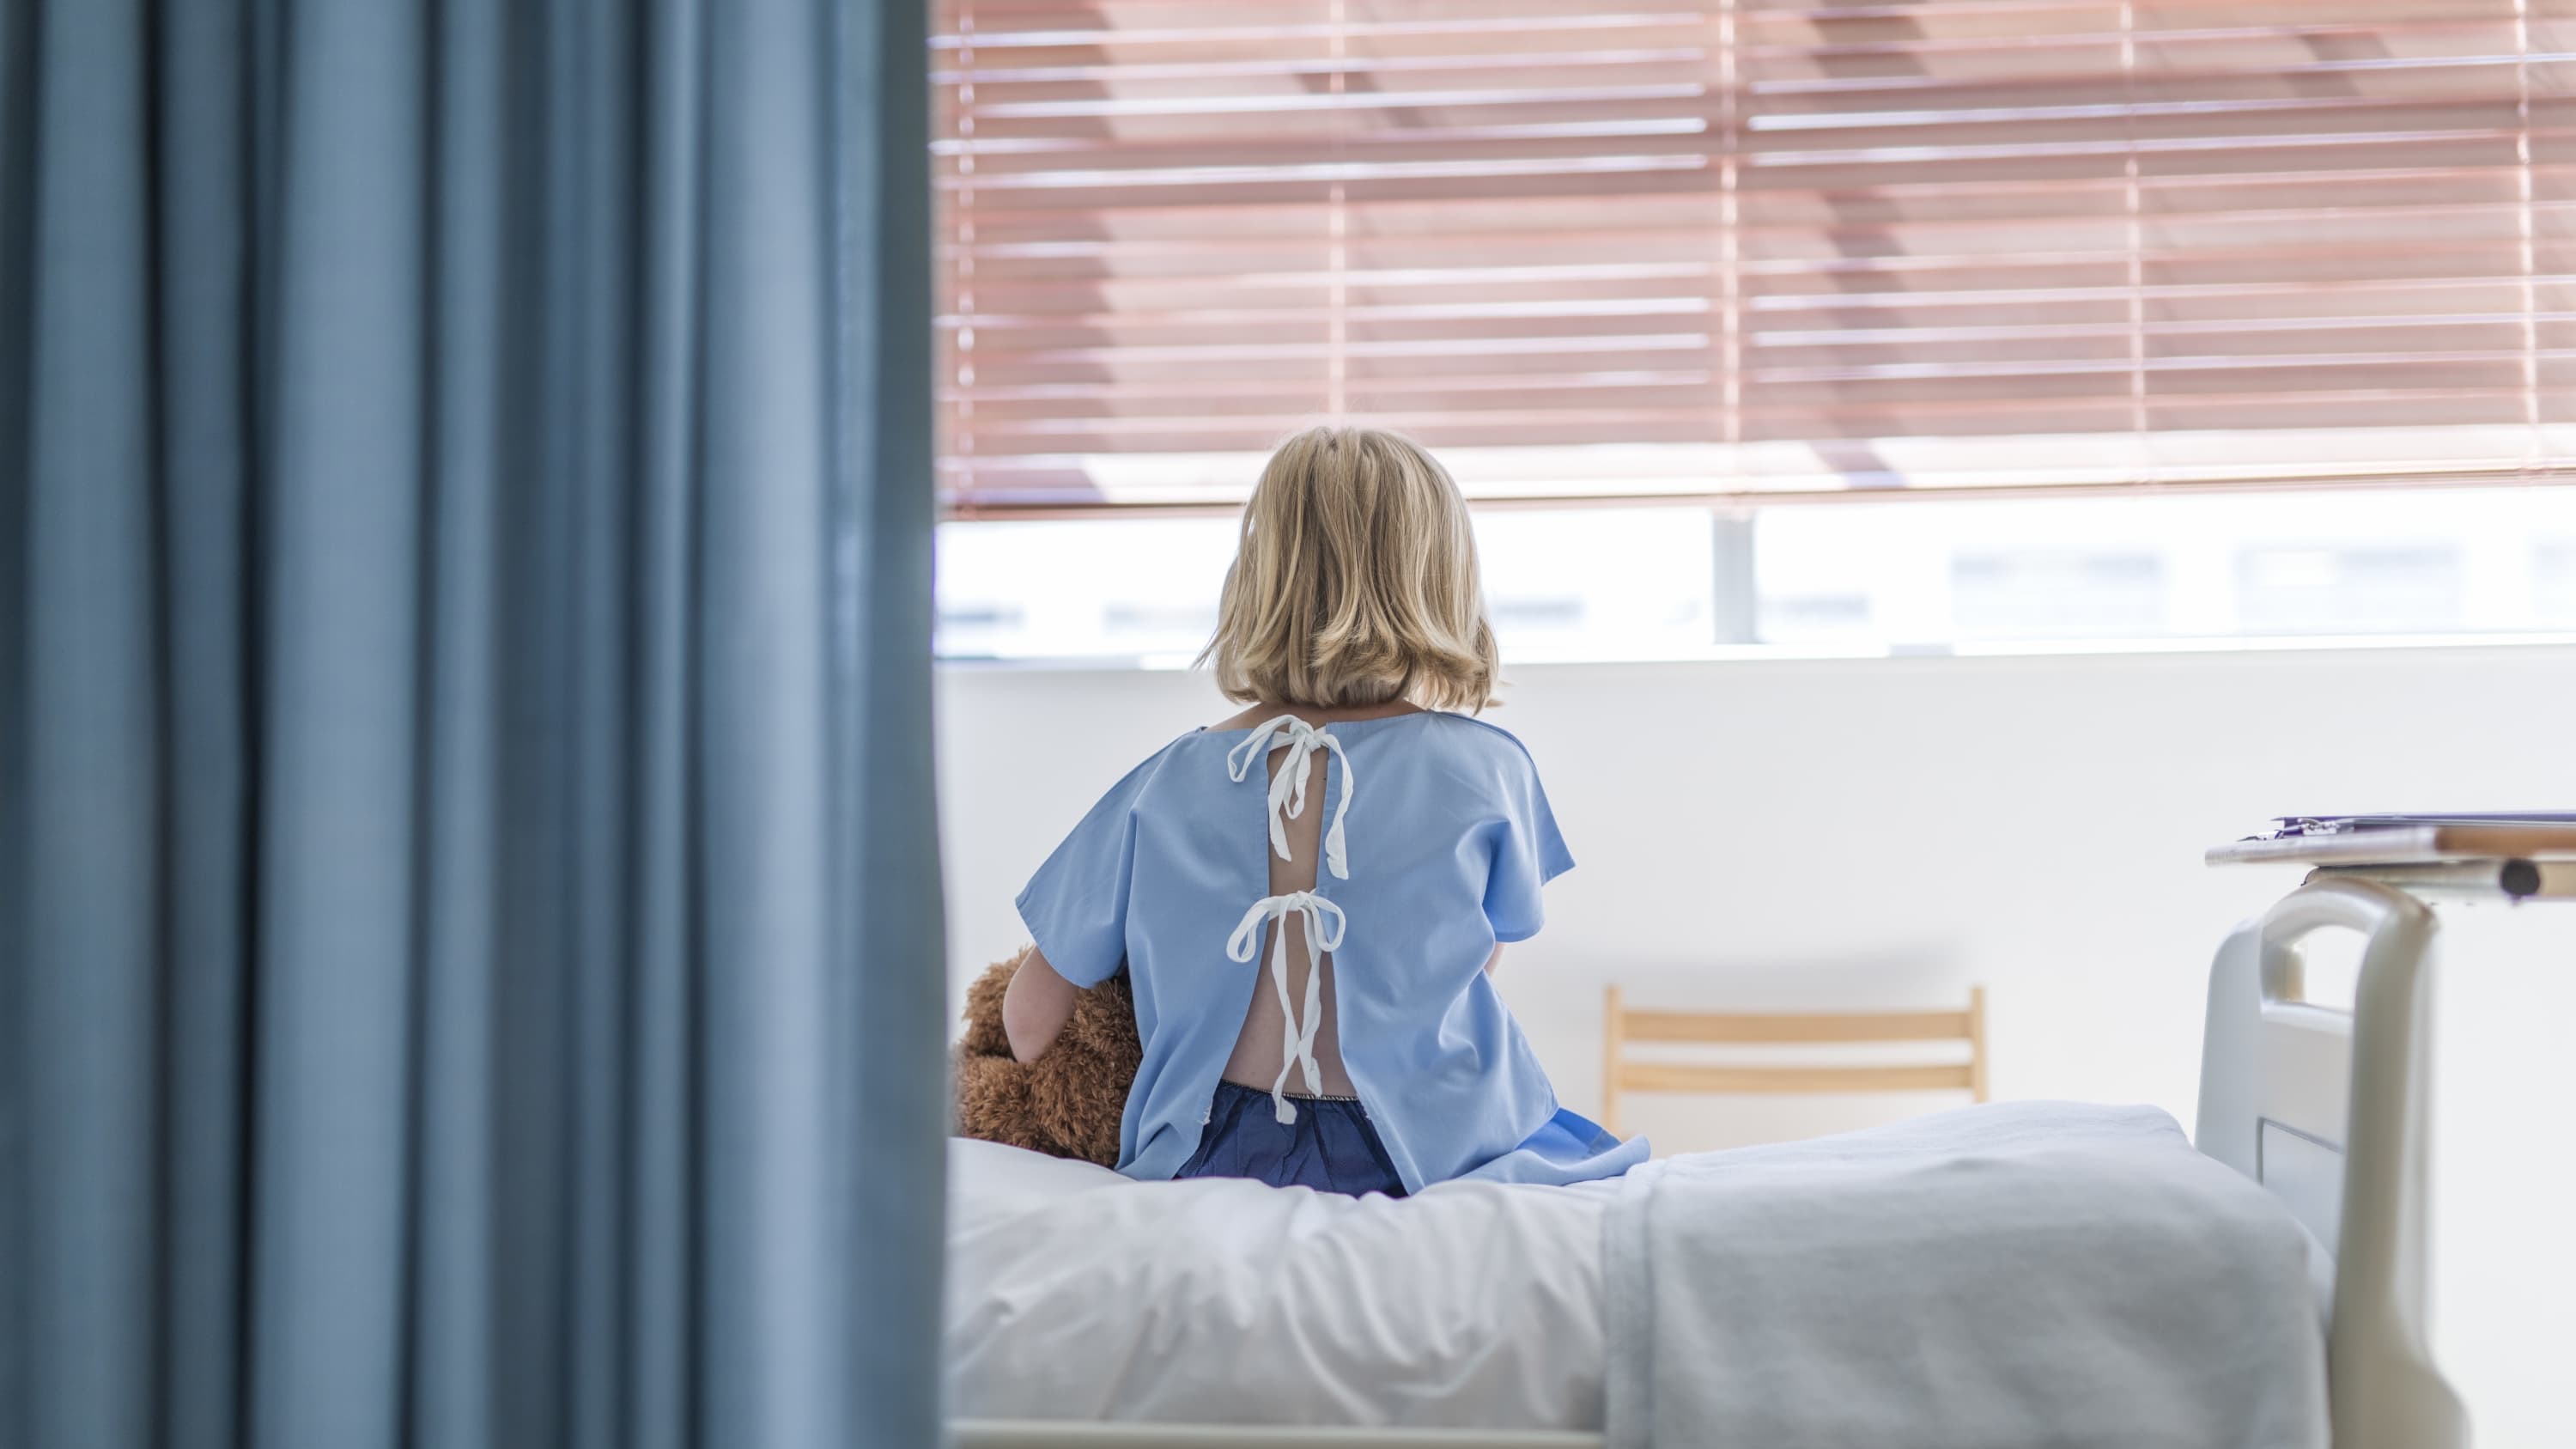 kid, possibly with hepatitis diagnosis, wearing a hospital gown on a hospital bed